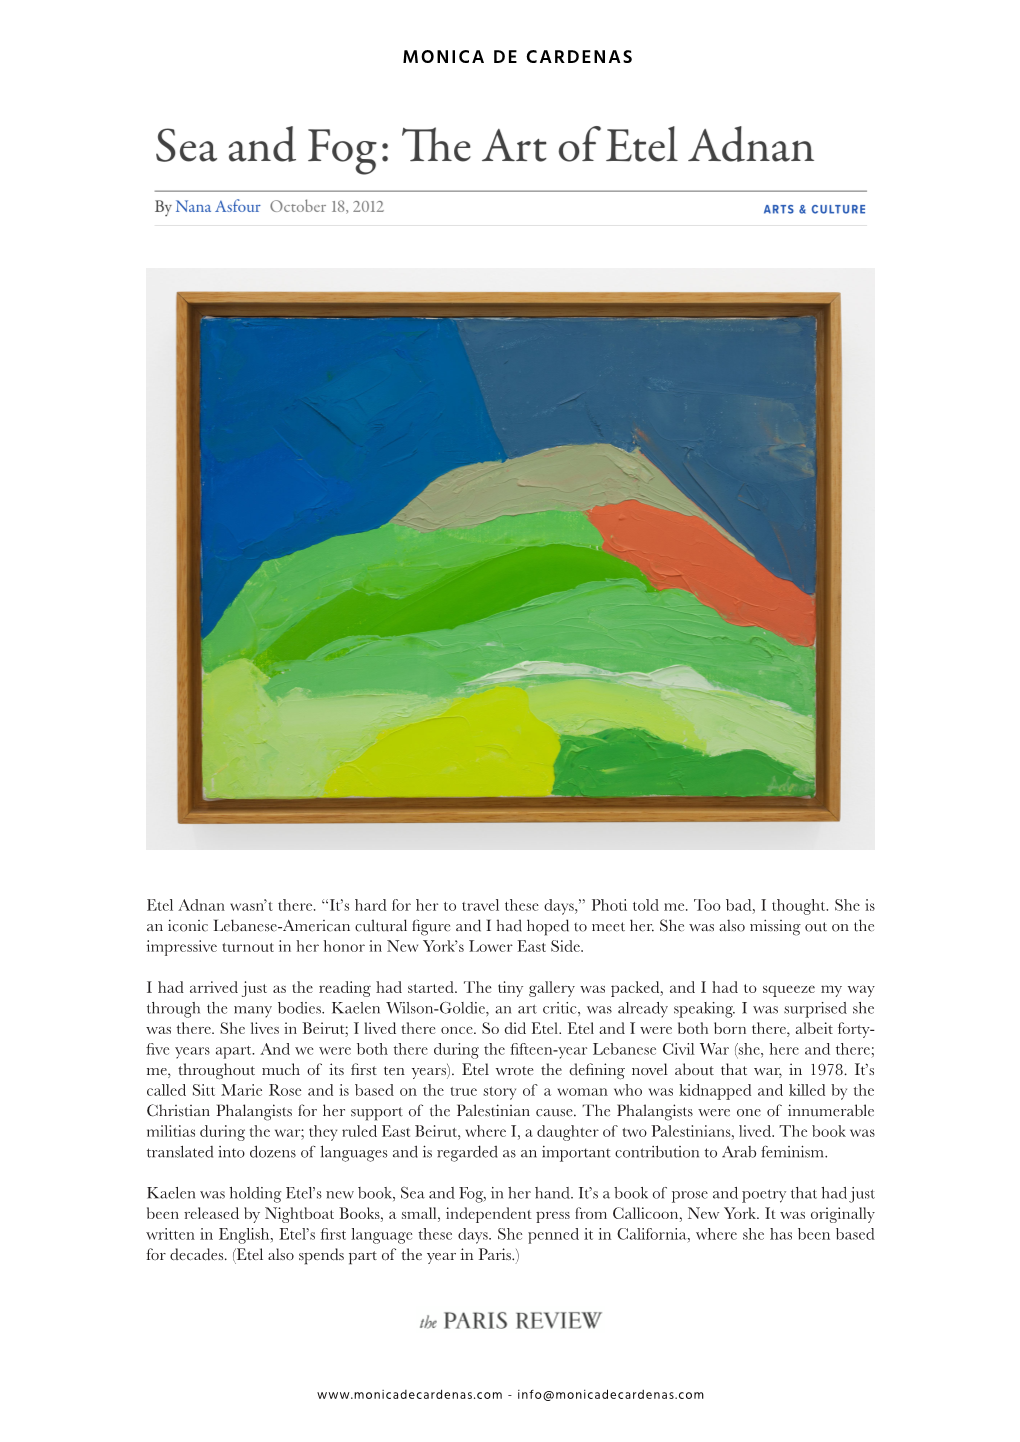 Etel Adnan Wasn't There. “It's Hard for Her to Travel These Days,” Photi Told